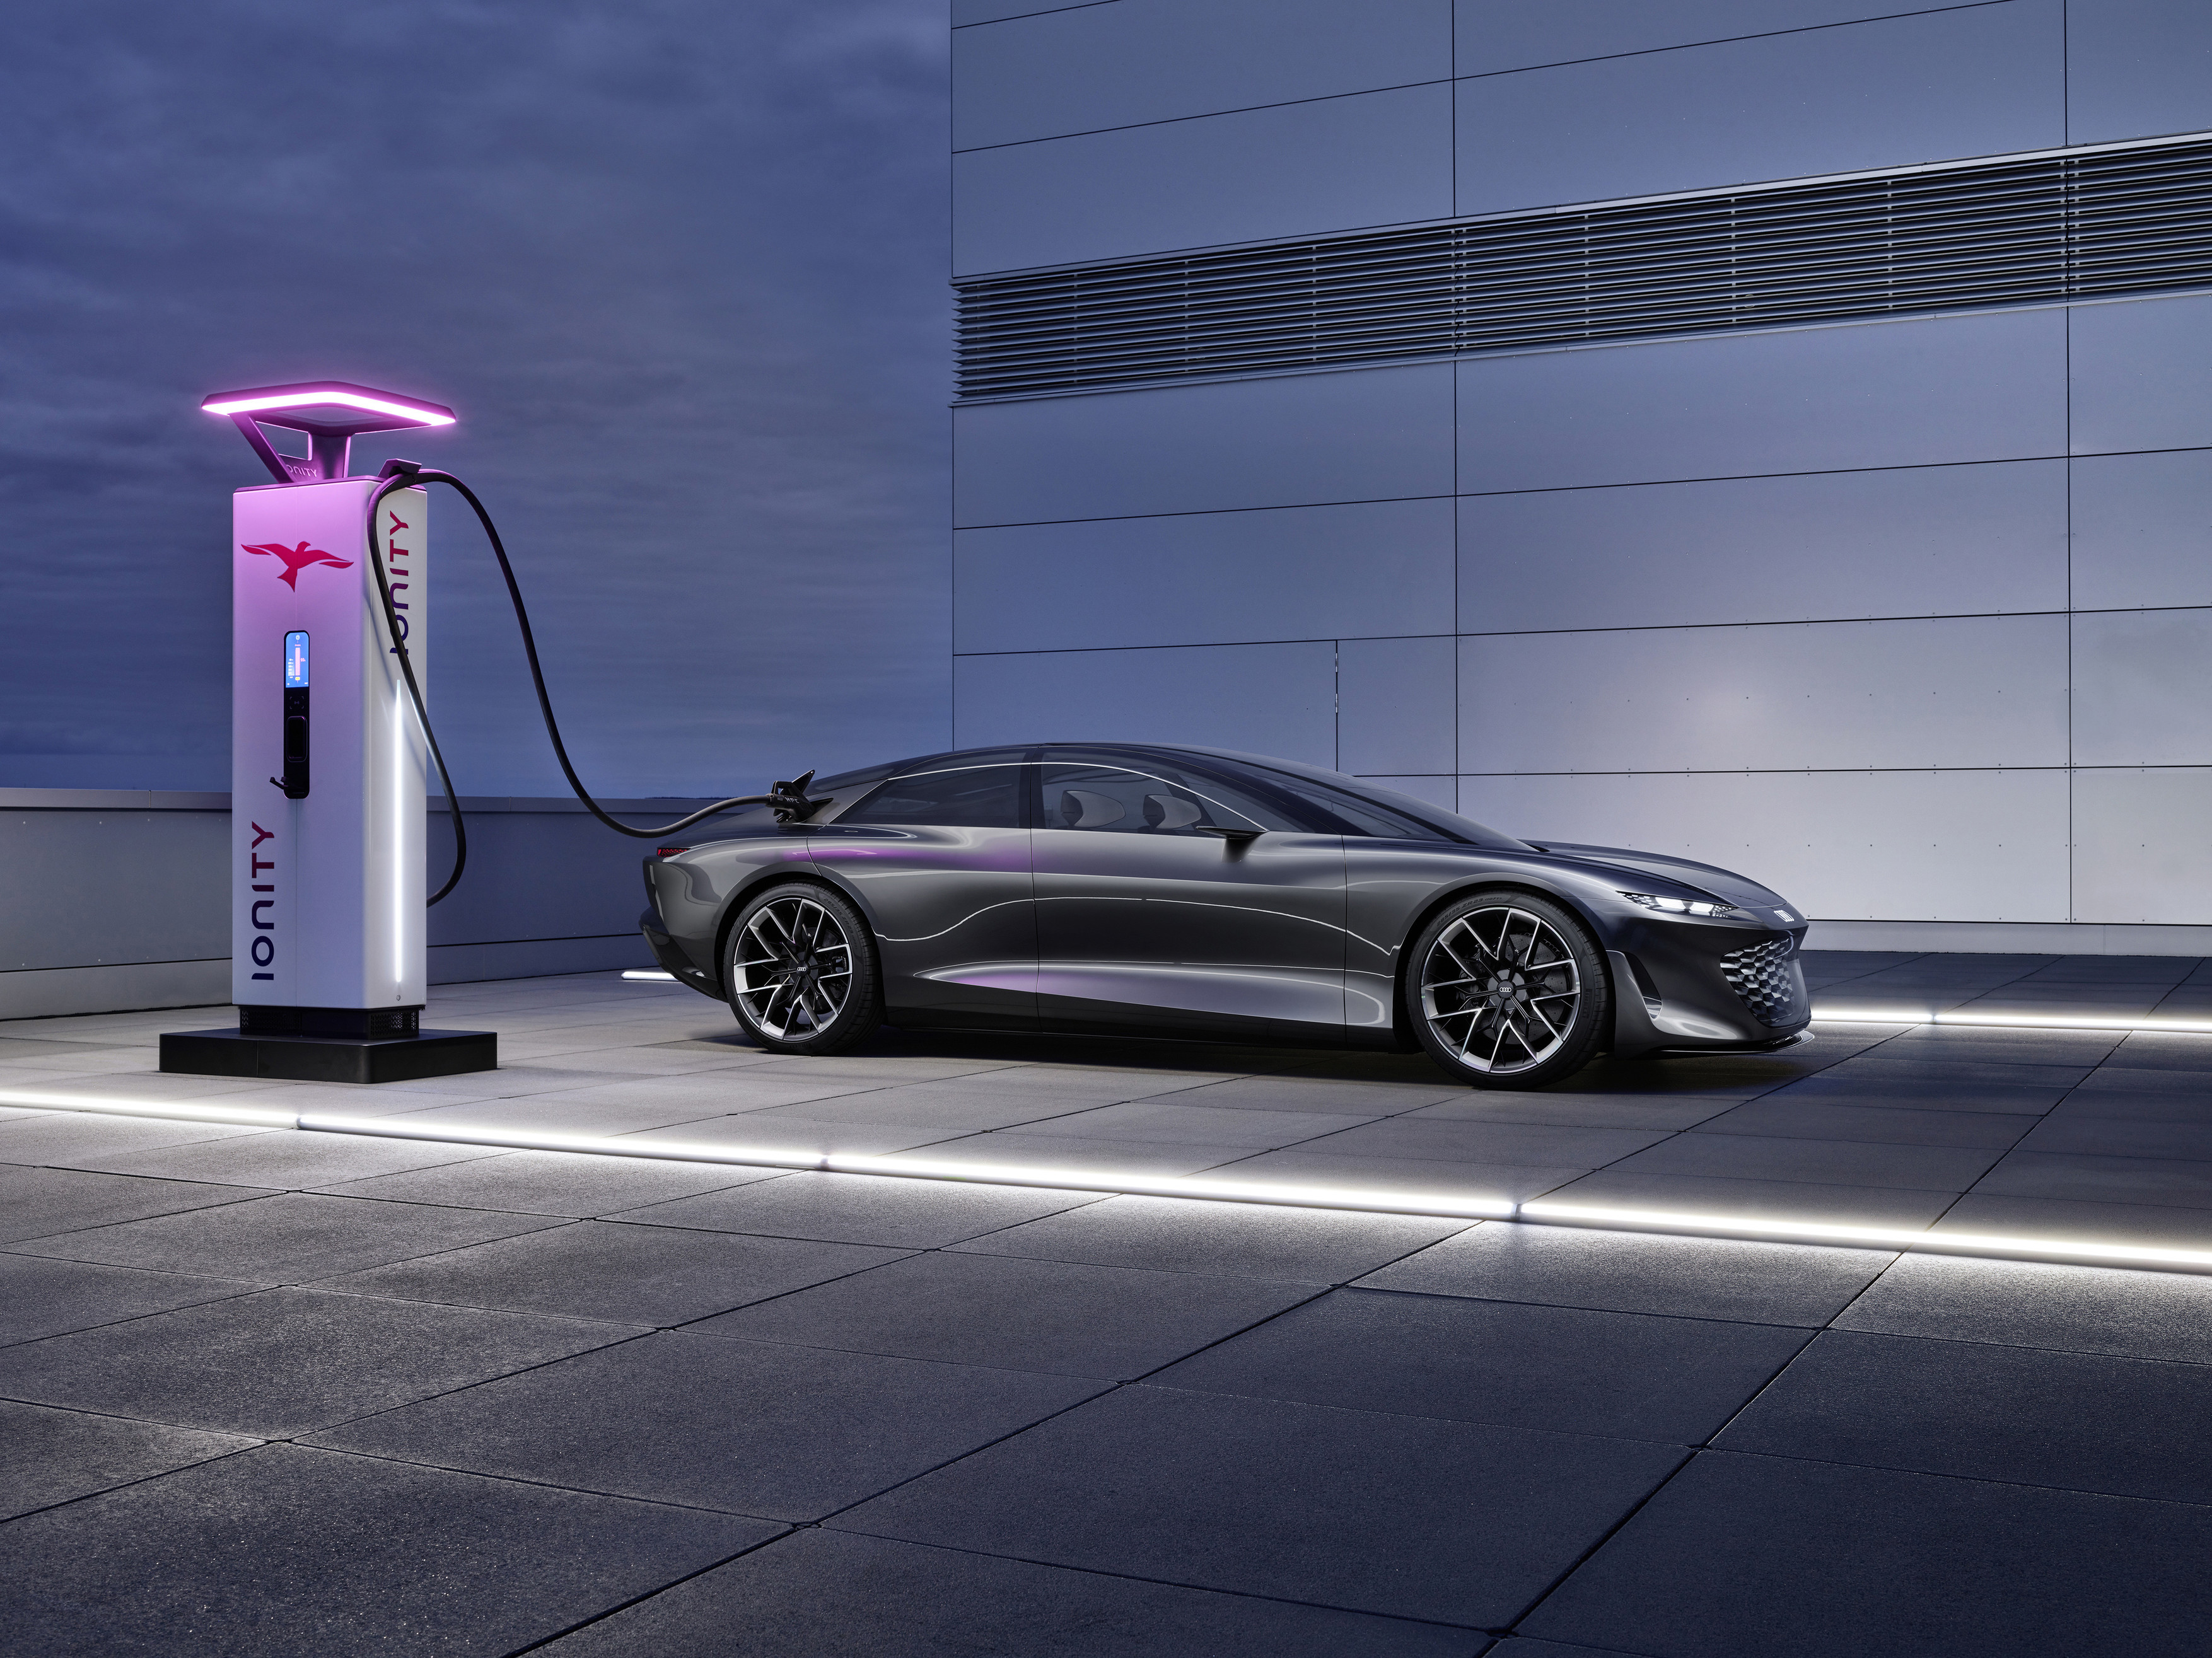 Audi unveils wild new concept that hints at electric A8 sedan